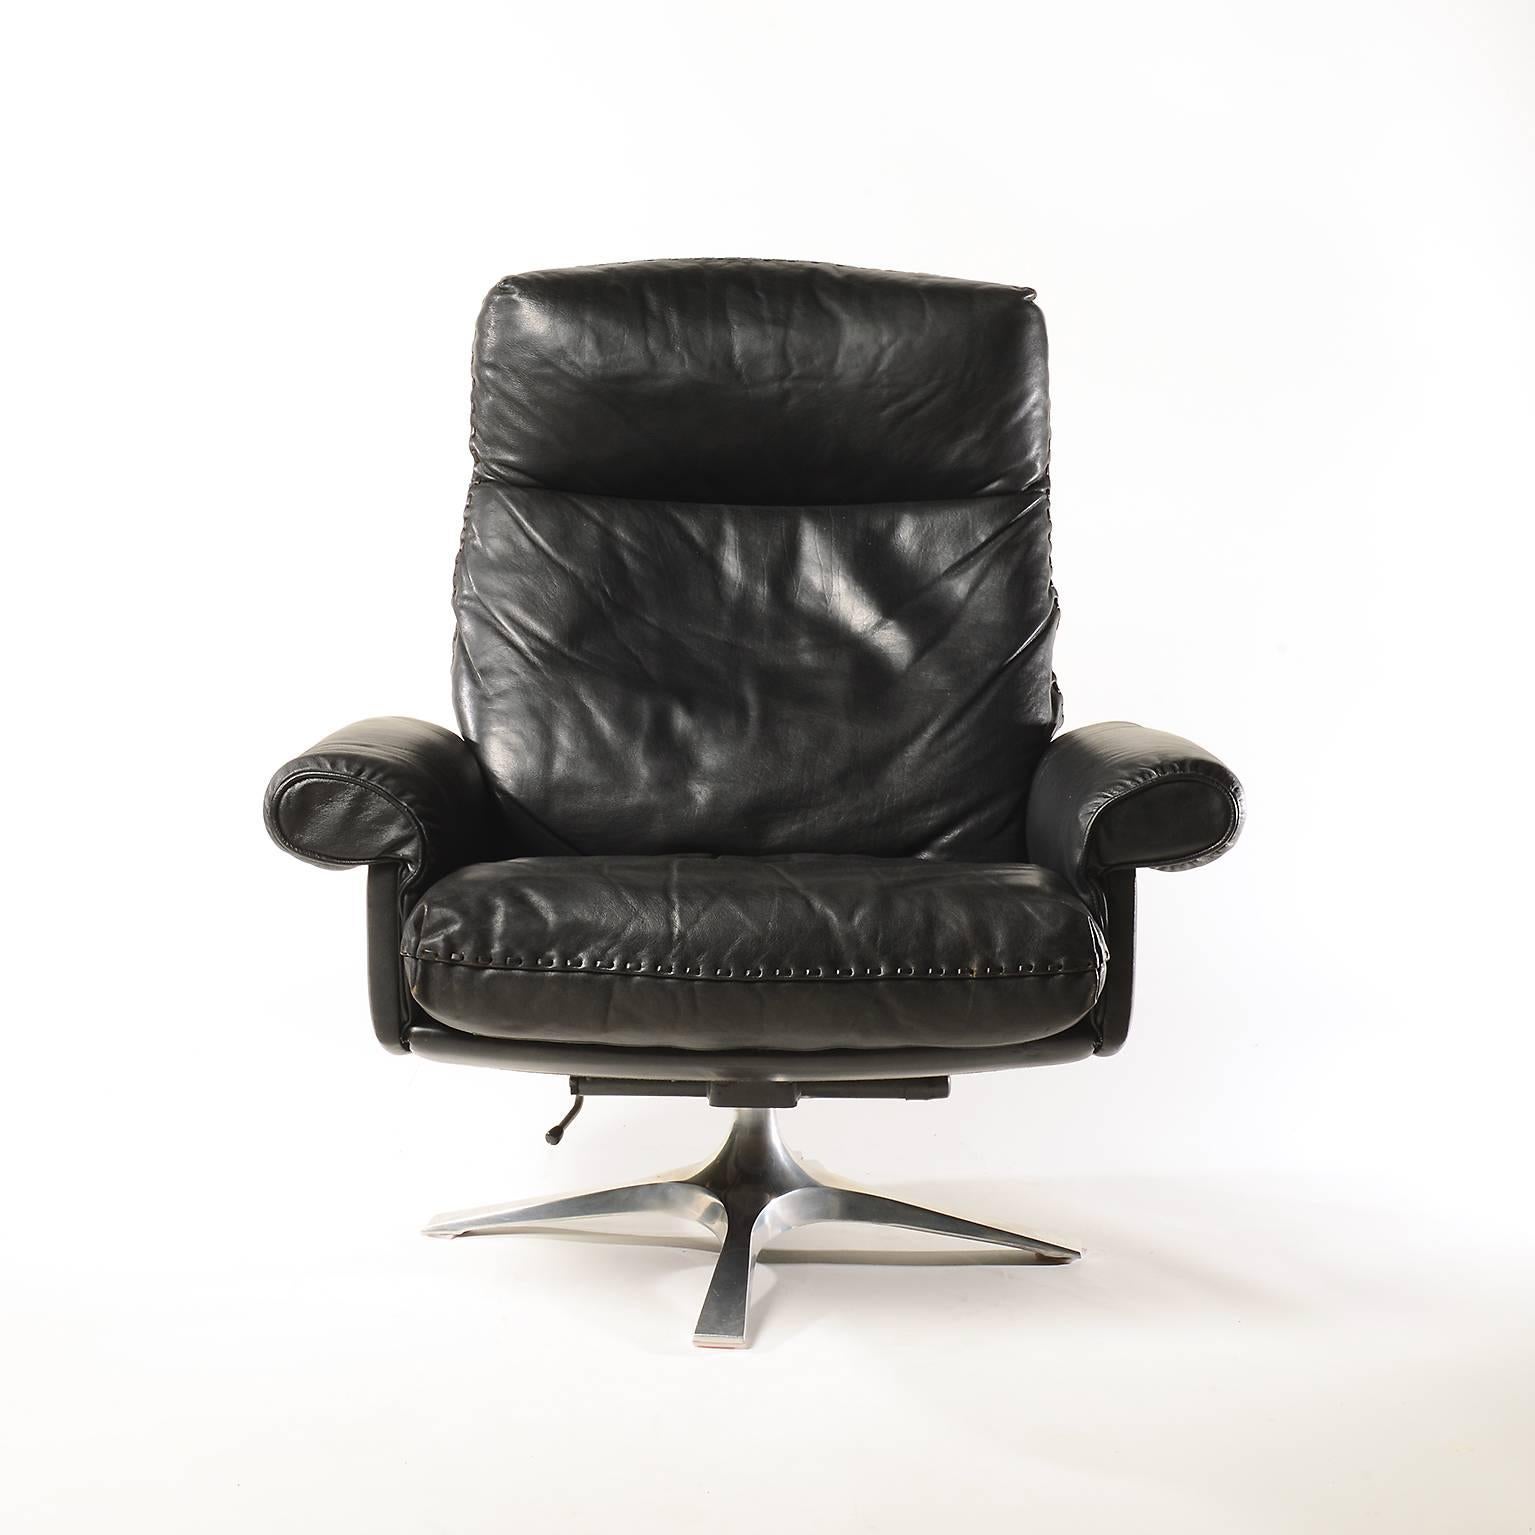 Midcentury De Sede DS 31 high-back swivel lounge armchair with ottoman, 1970
The chair was made in the 1970s by De Sede in Switzerland.
The armchair and ottoman sit on a polished swivel chrome plated base and are upholstered in black leather with